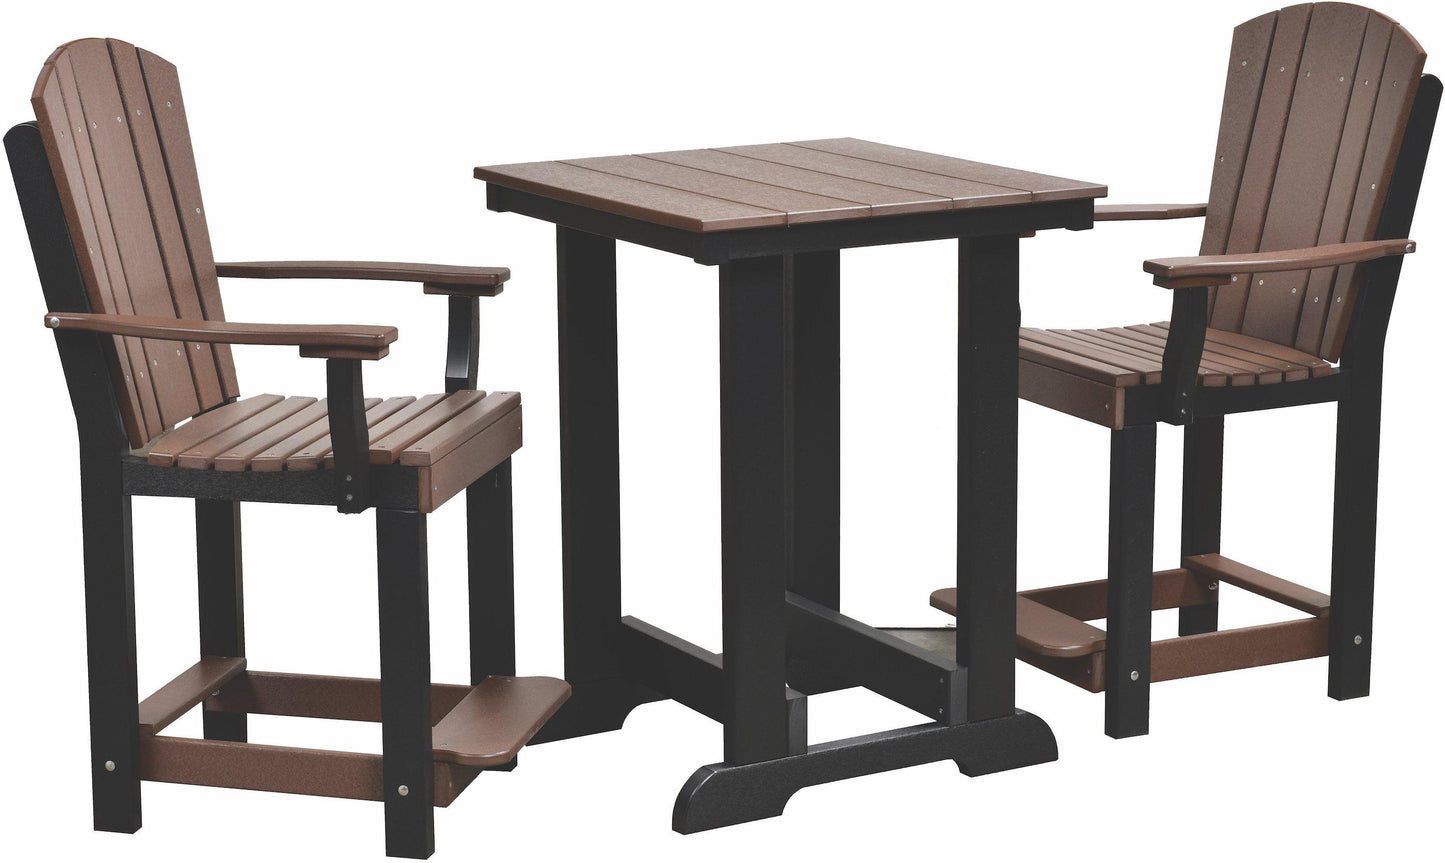 Wildridge Outdoor Heritage Recycled Plastic Patio Set (COUNTER HEIGHT) - LEAD TIME TO SHIP 3 WEEKS